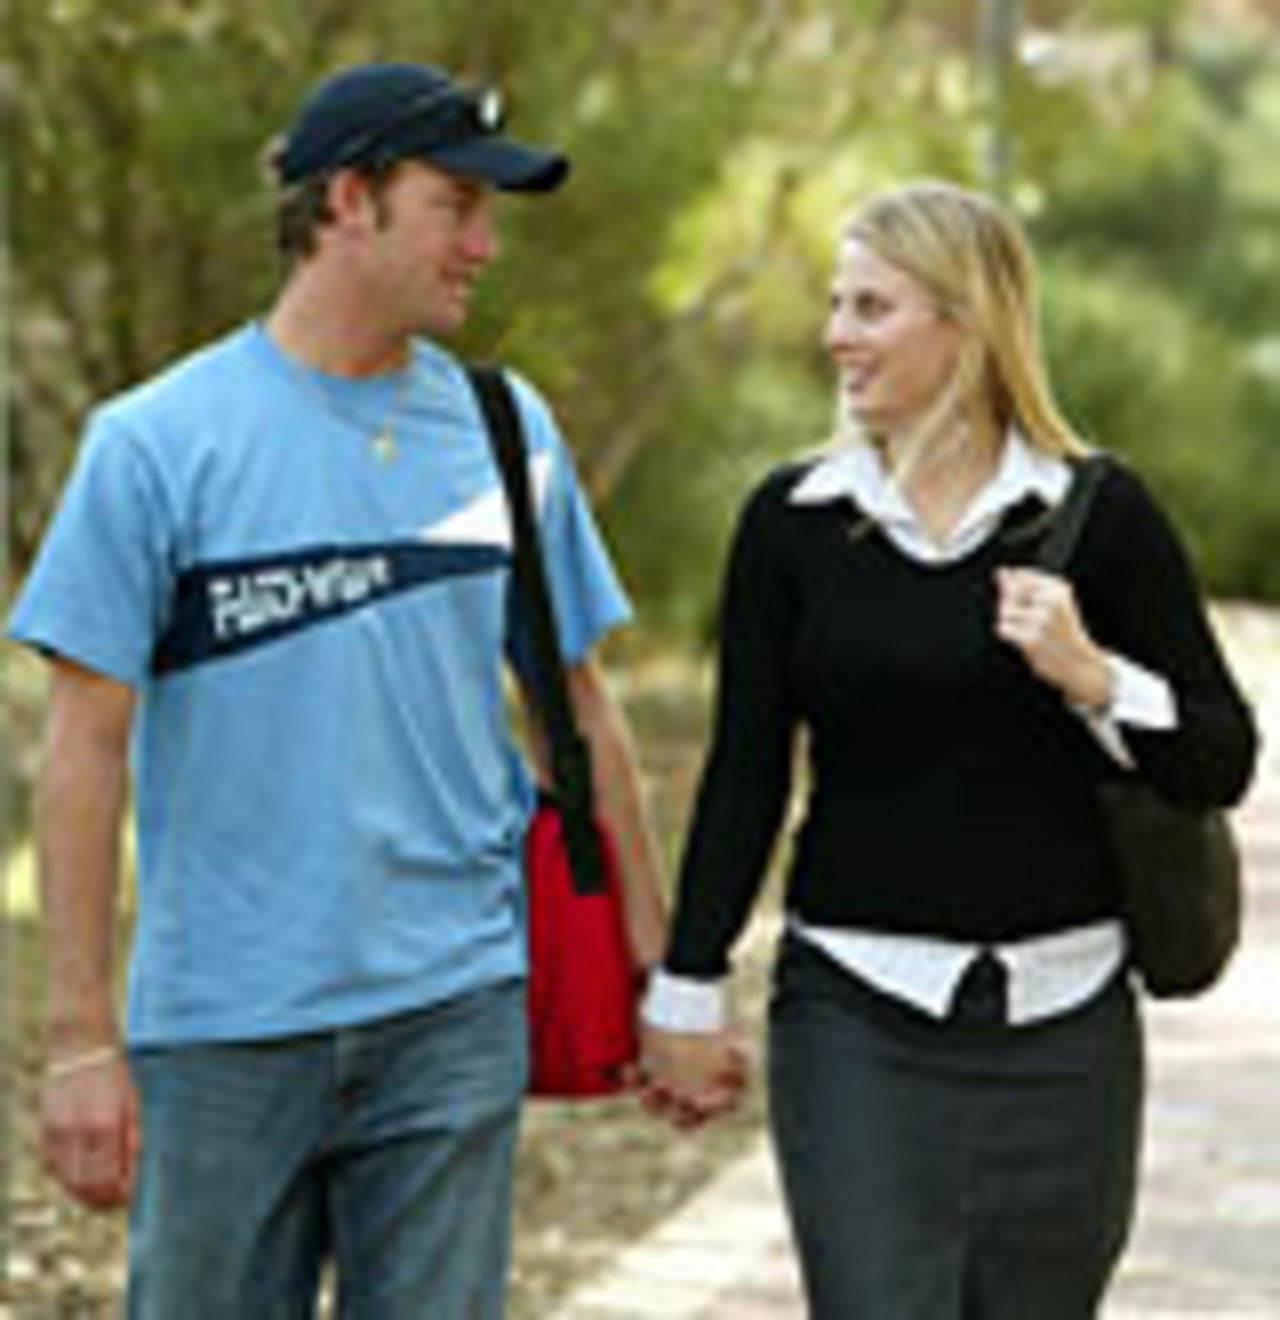 ean Ervine chats with his partner Melissa Marsh, Perth, May 17, 2004